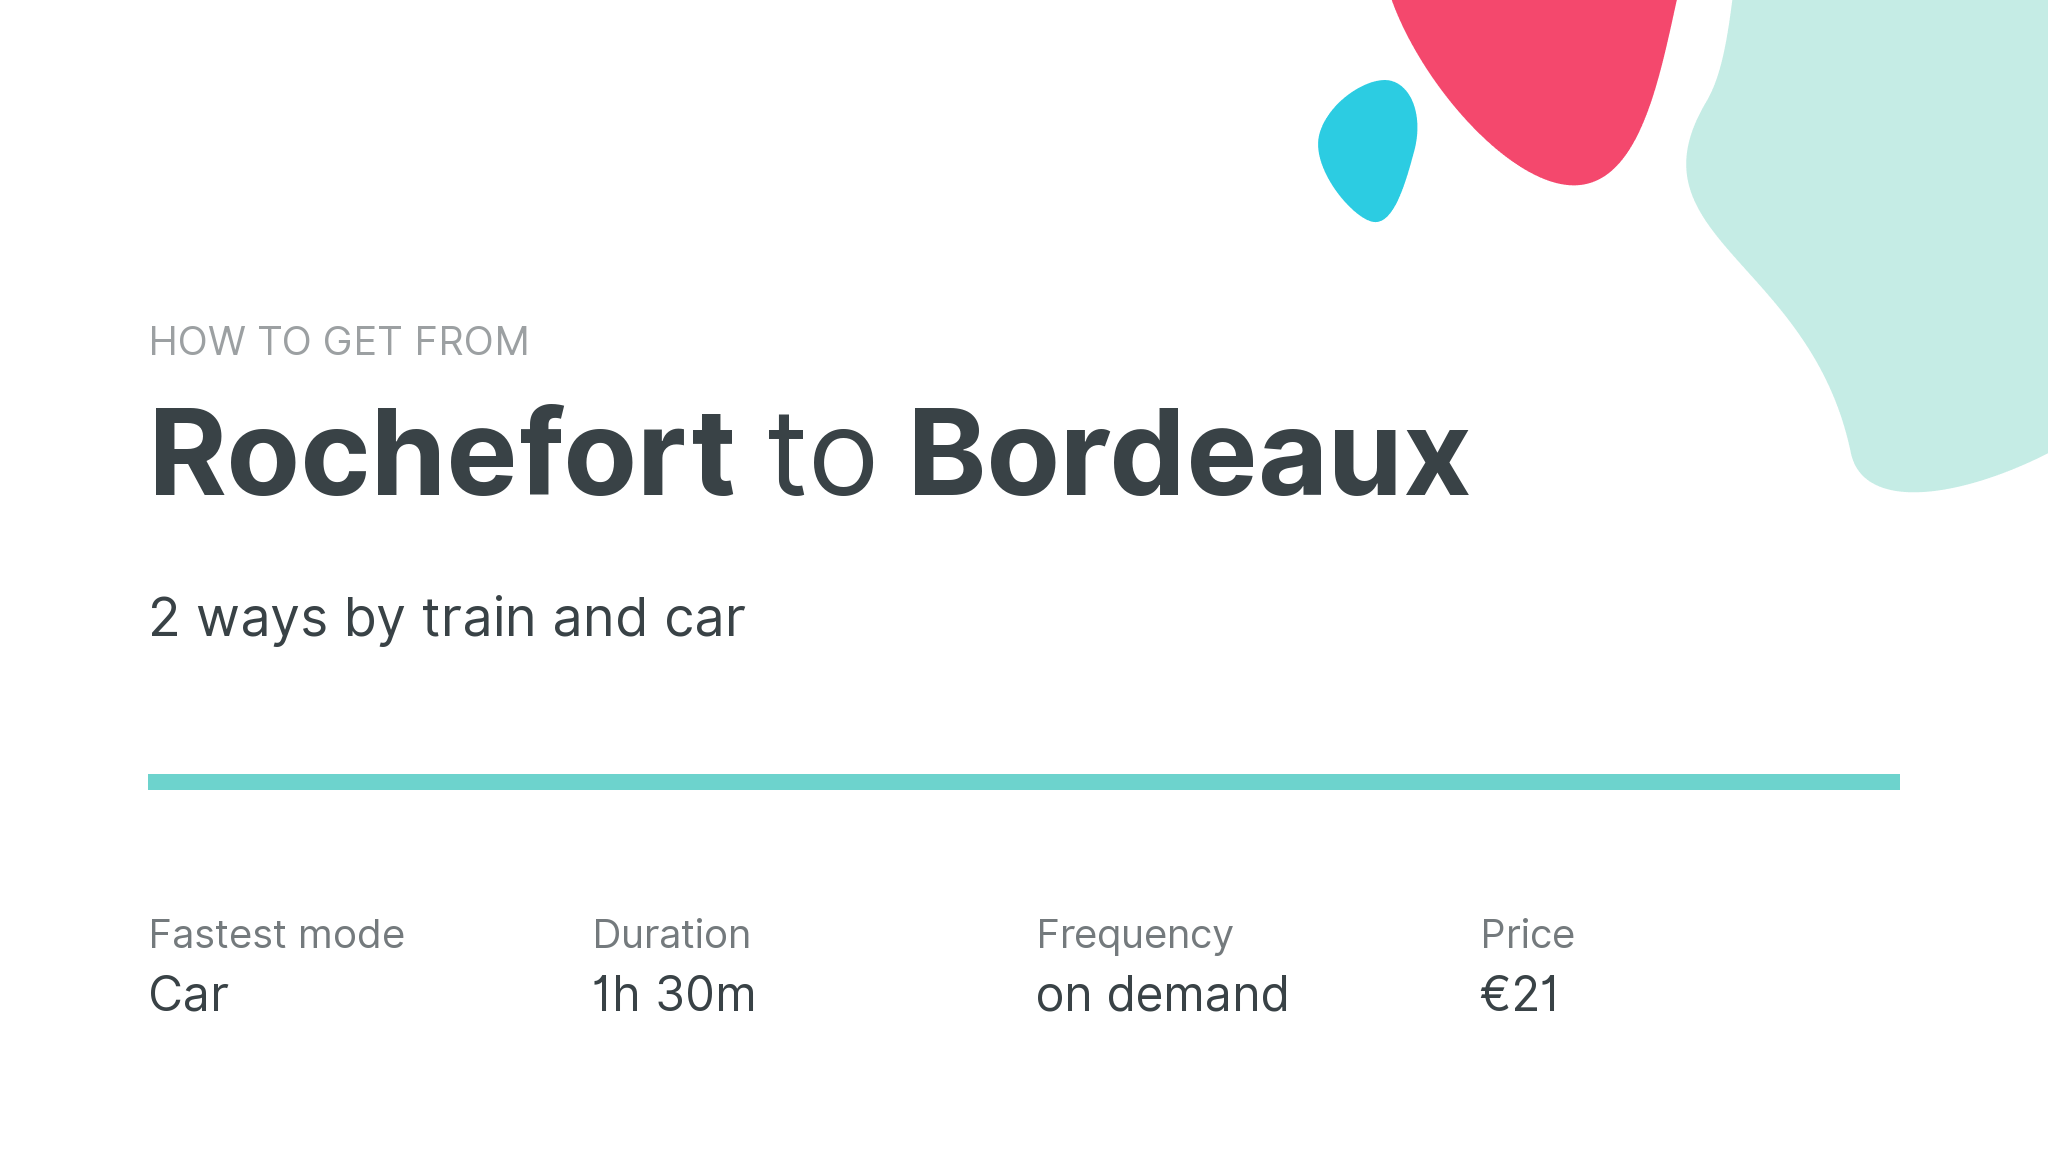 How do I get from Rochefort to Bordeaux